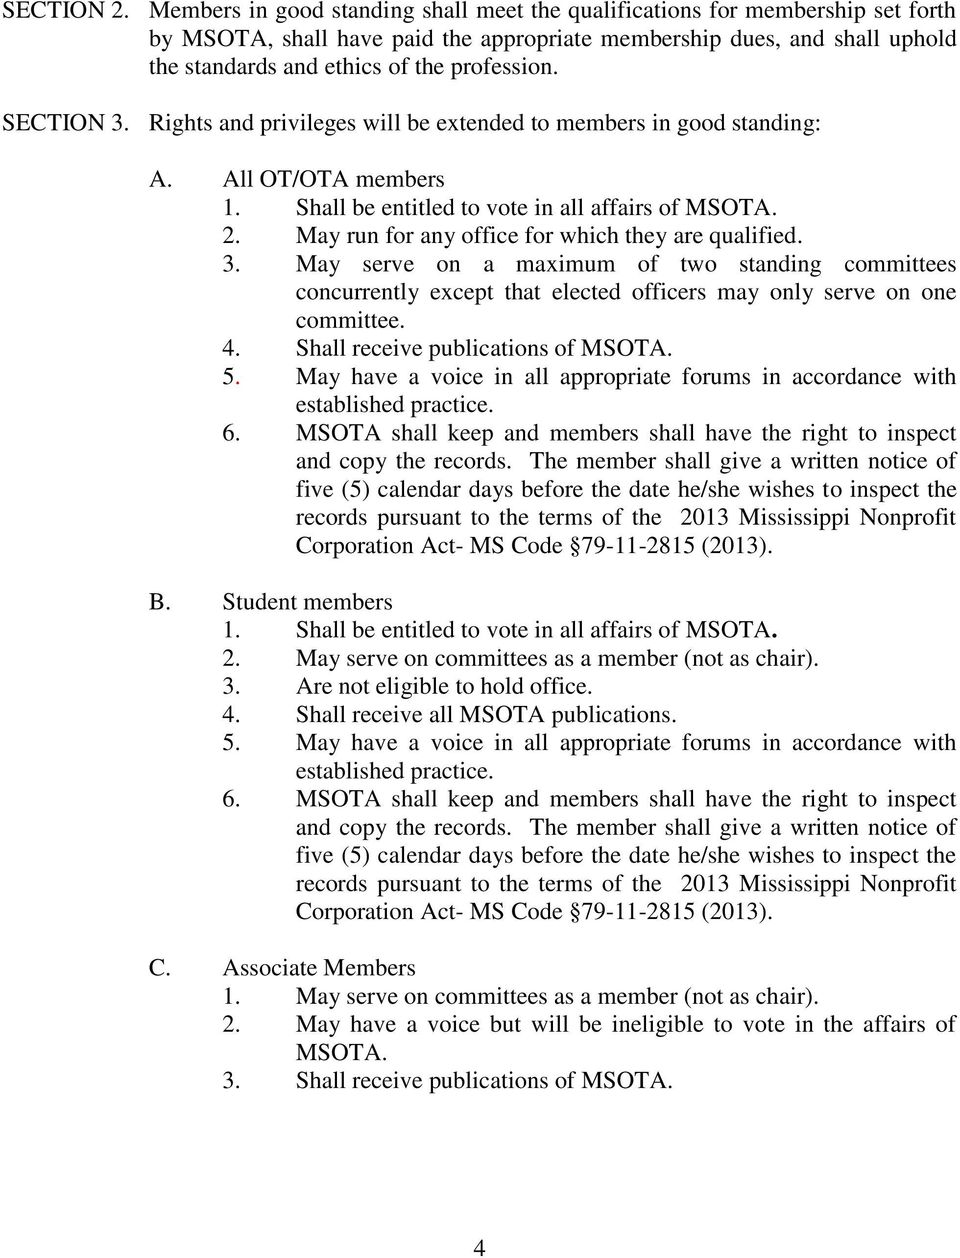 Rights and privileges will be extended to members in good standing: A. All OT/OTA members 1. Shall be entitled to vote in all affairs of MSOTA. 2. May run for any office for which they are qualified.